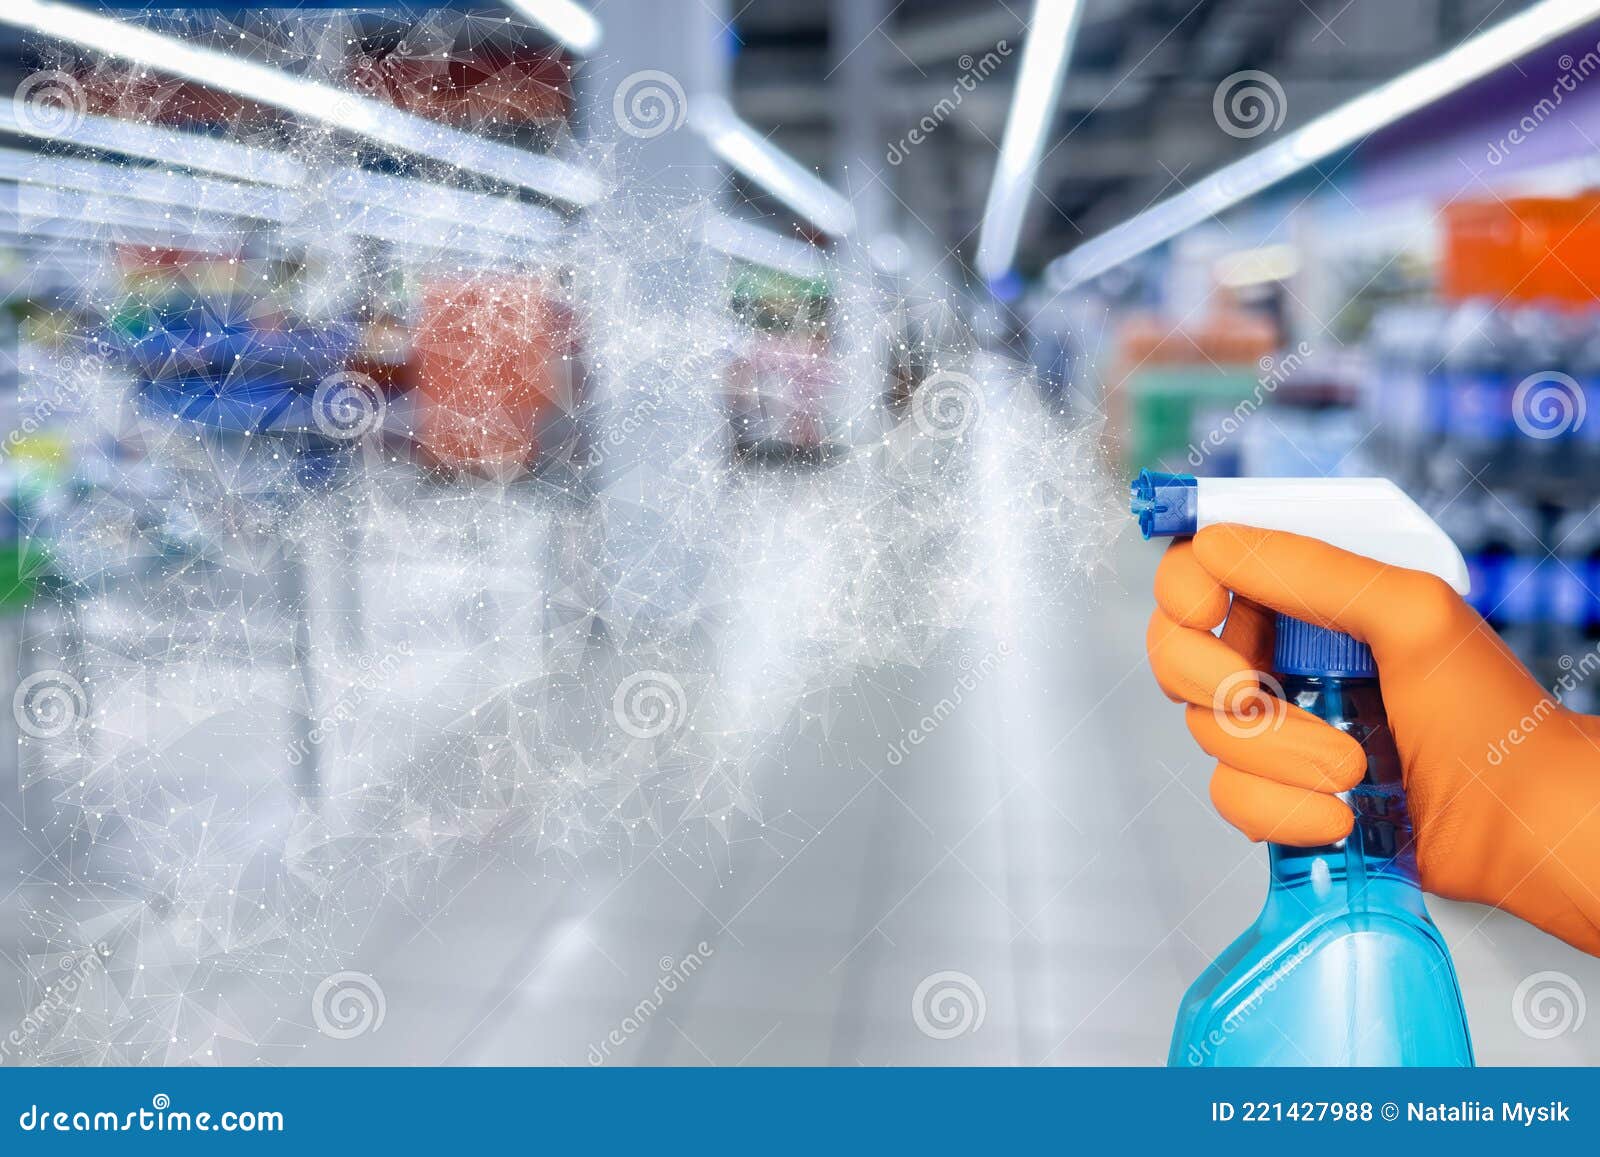 concept of cleaning services for shops and industrial premises